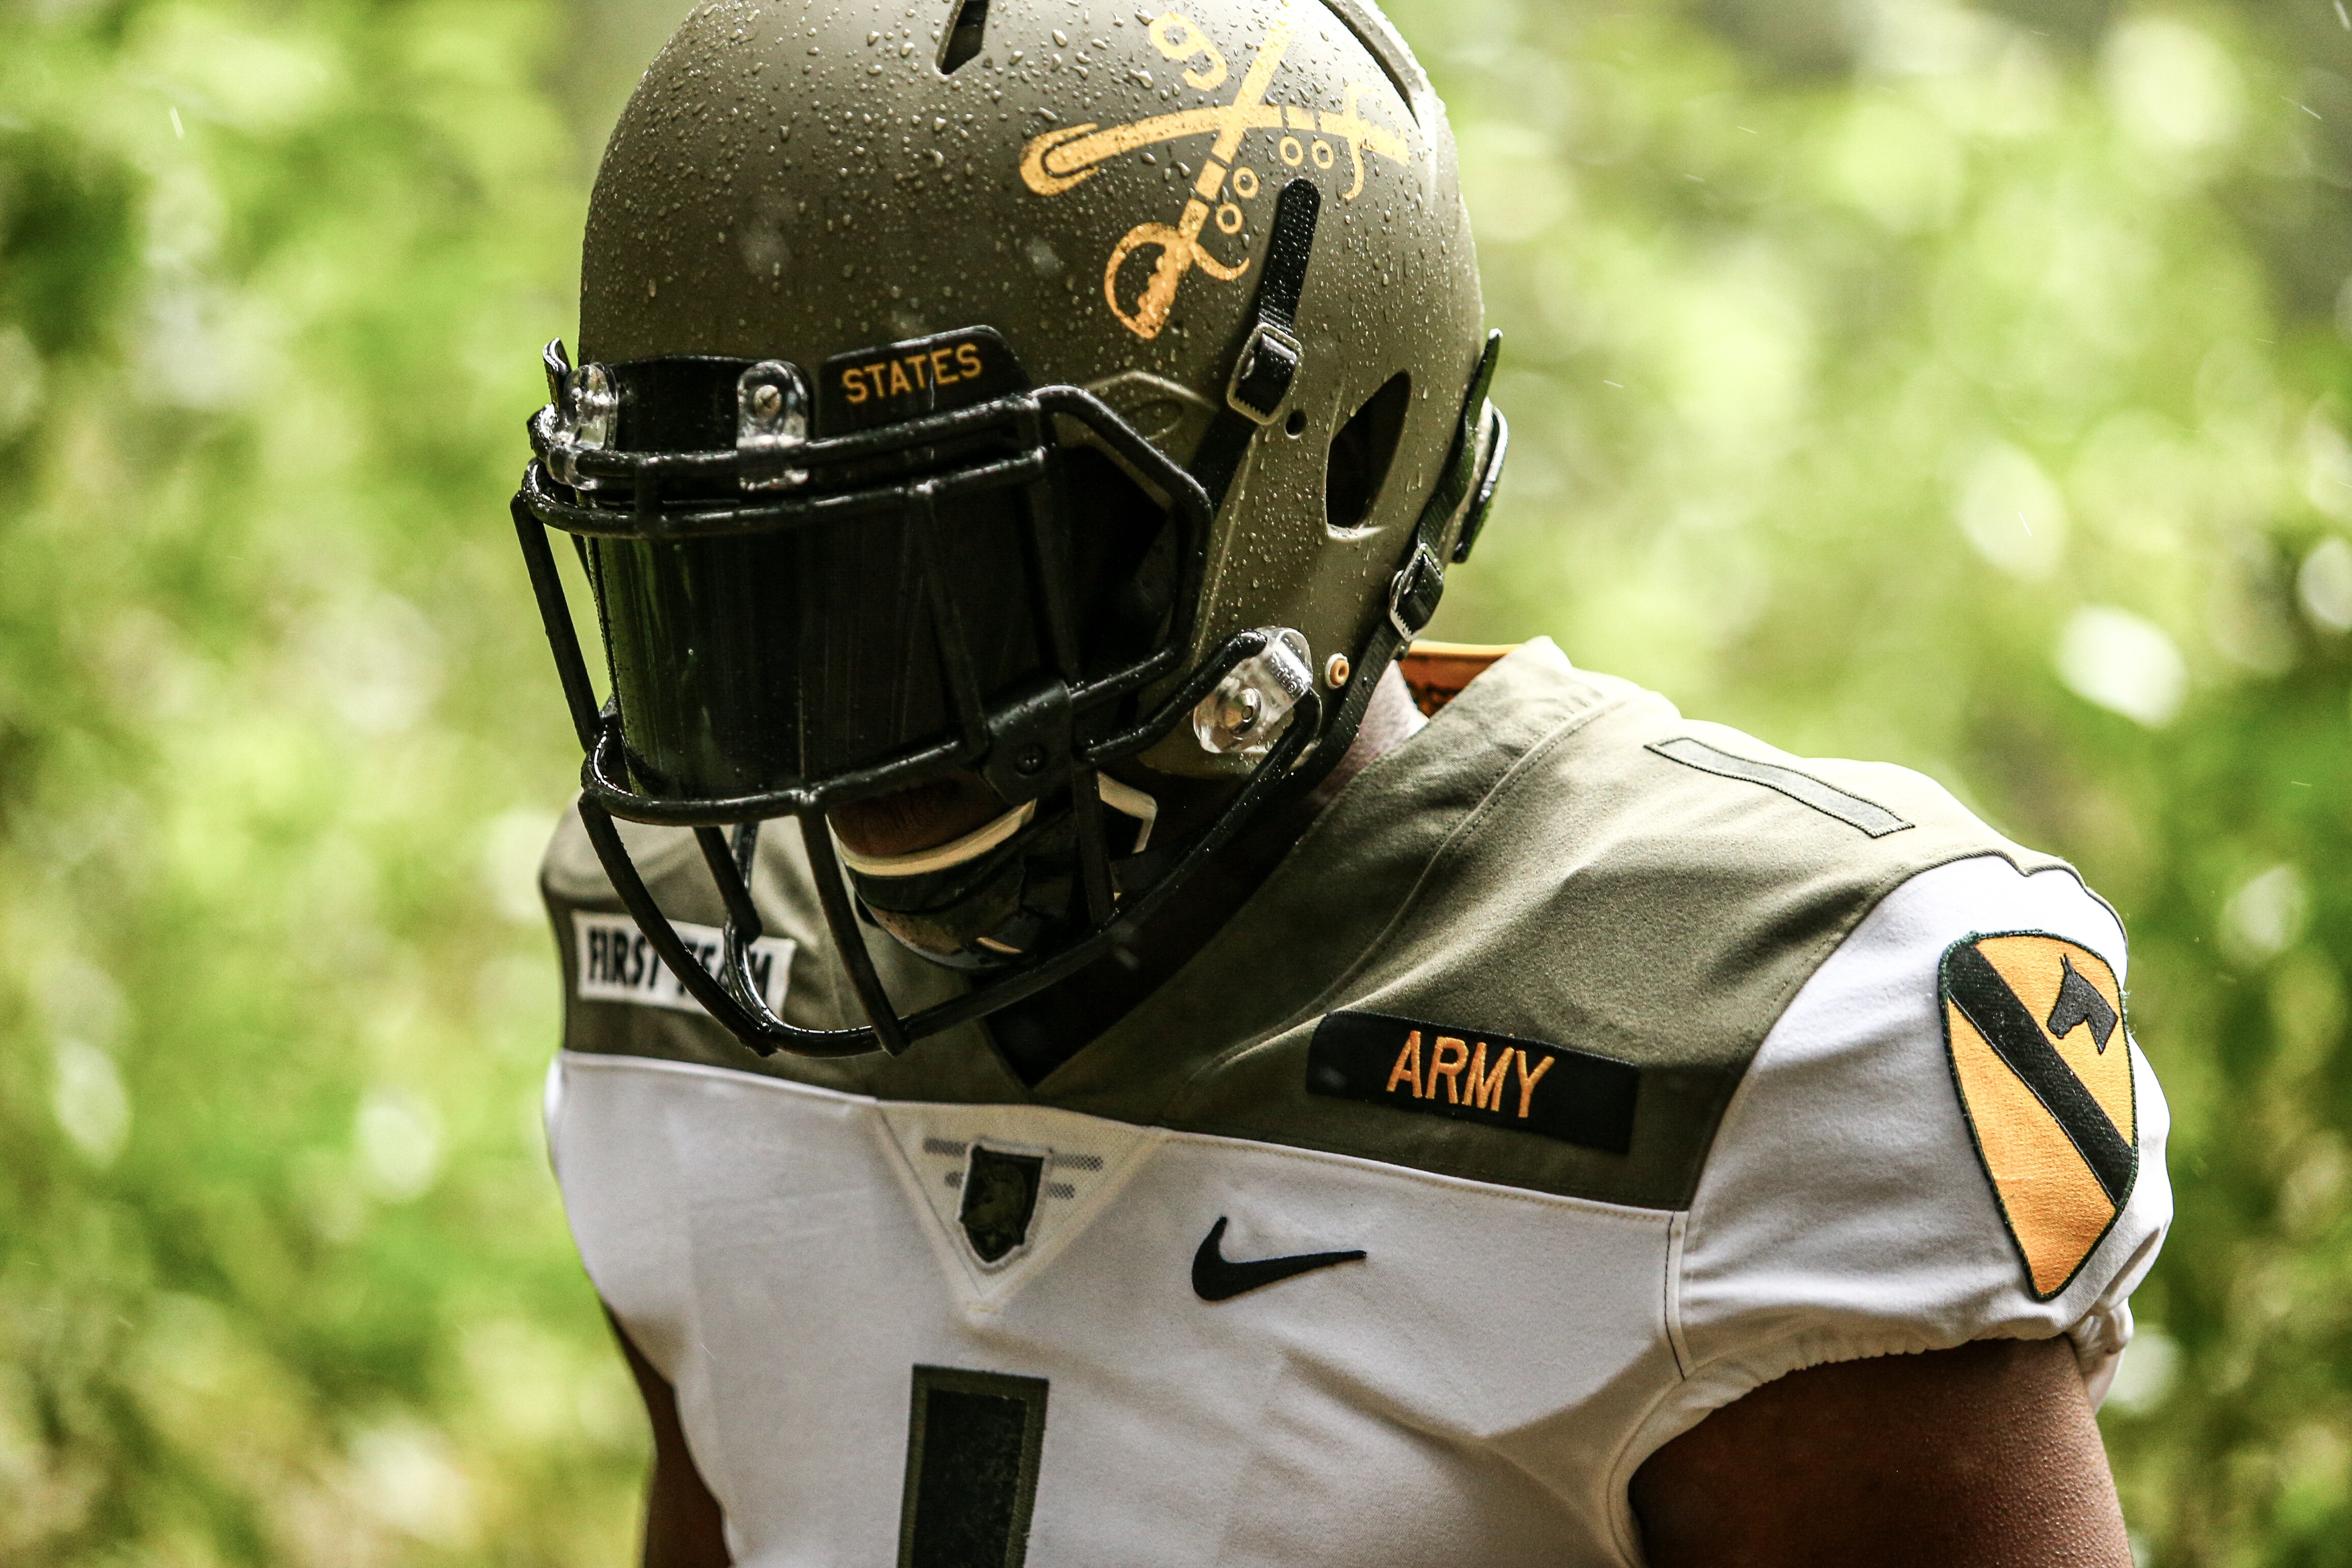 The Navy Football Uniforms for the 2022 Army-Navy Game are Out of